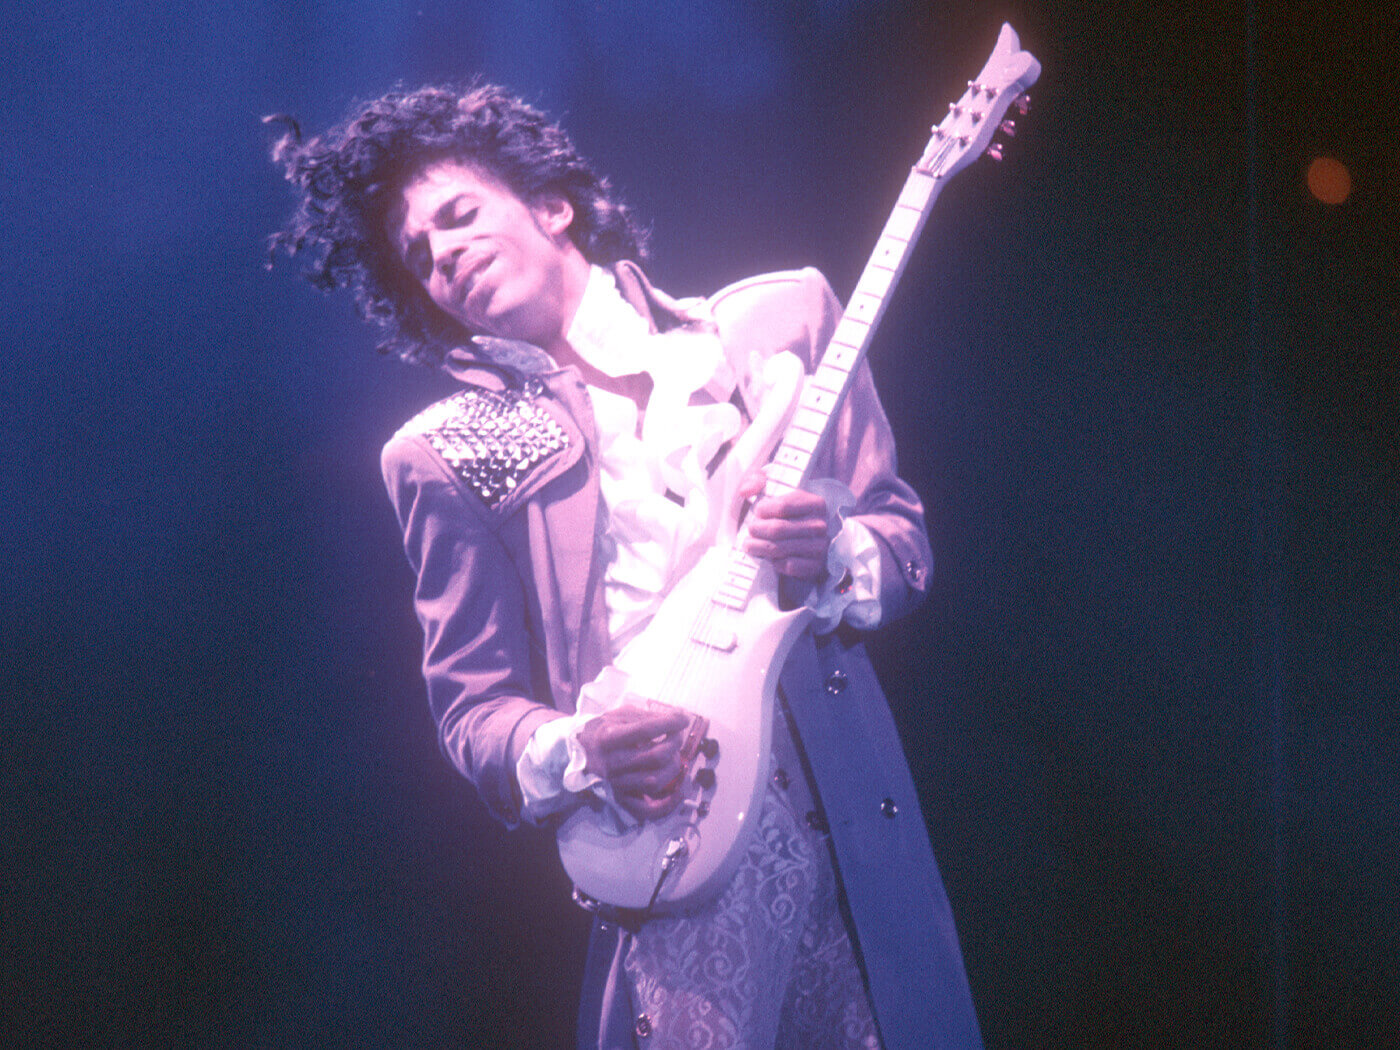 Prince performing onstage in the ’80s, photo by Michael Ochs Archives/Getty Images